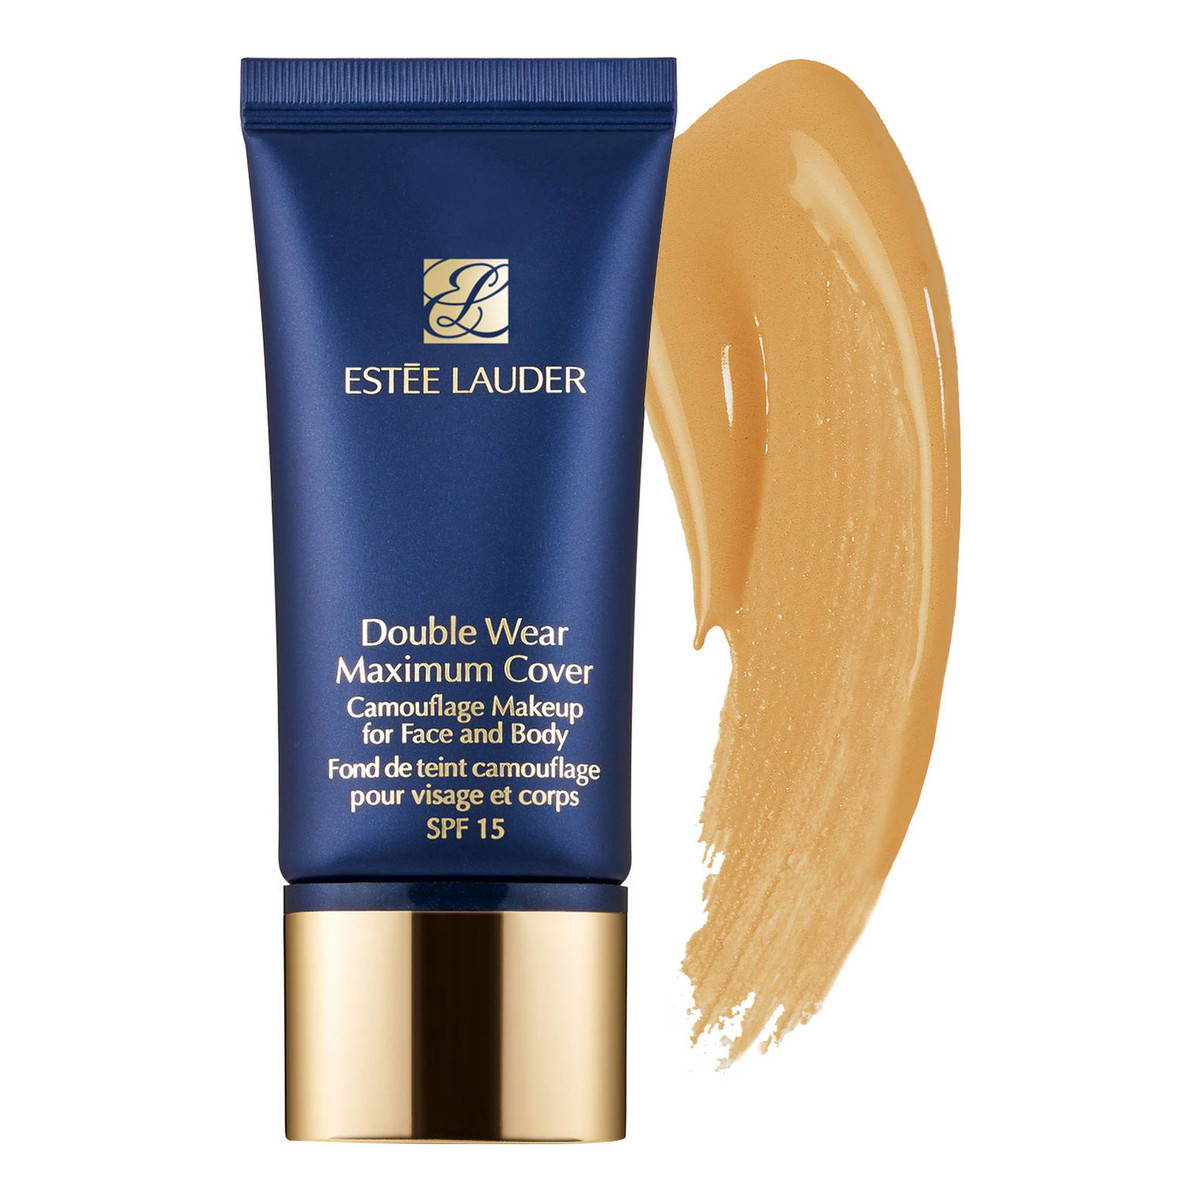 Estee Lauder Double Wear Maximum Cover Camouflage Makeup For Face And Body podkład kryjący SPF15 30ml